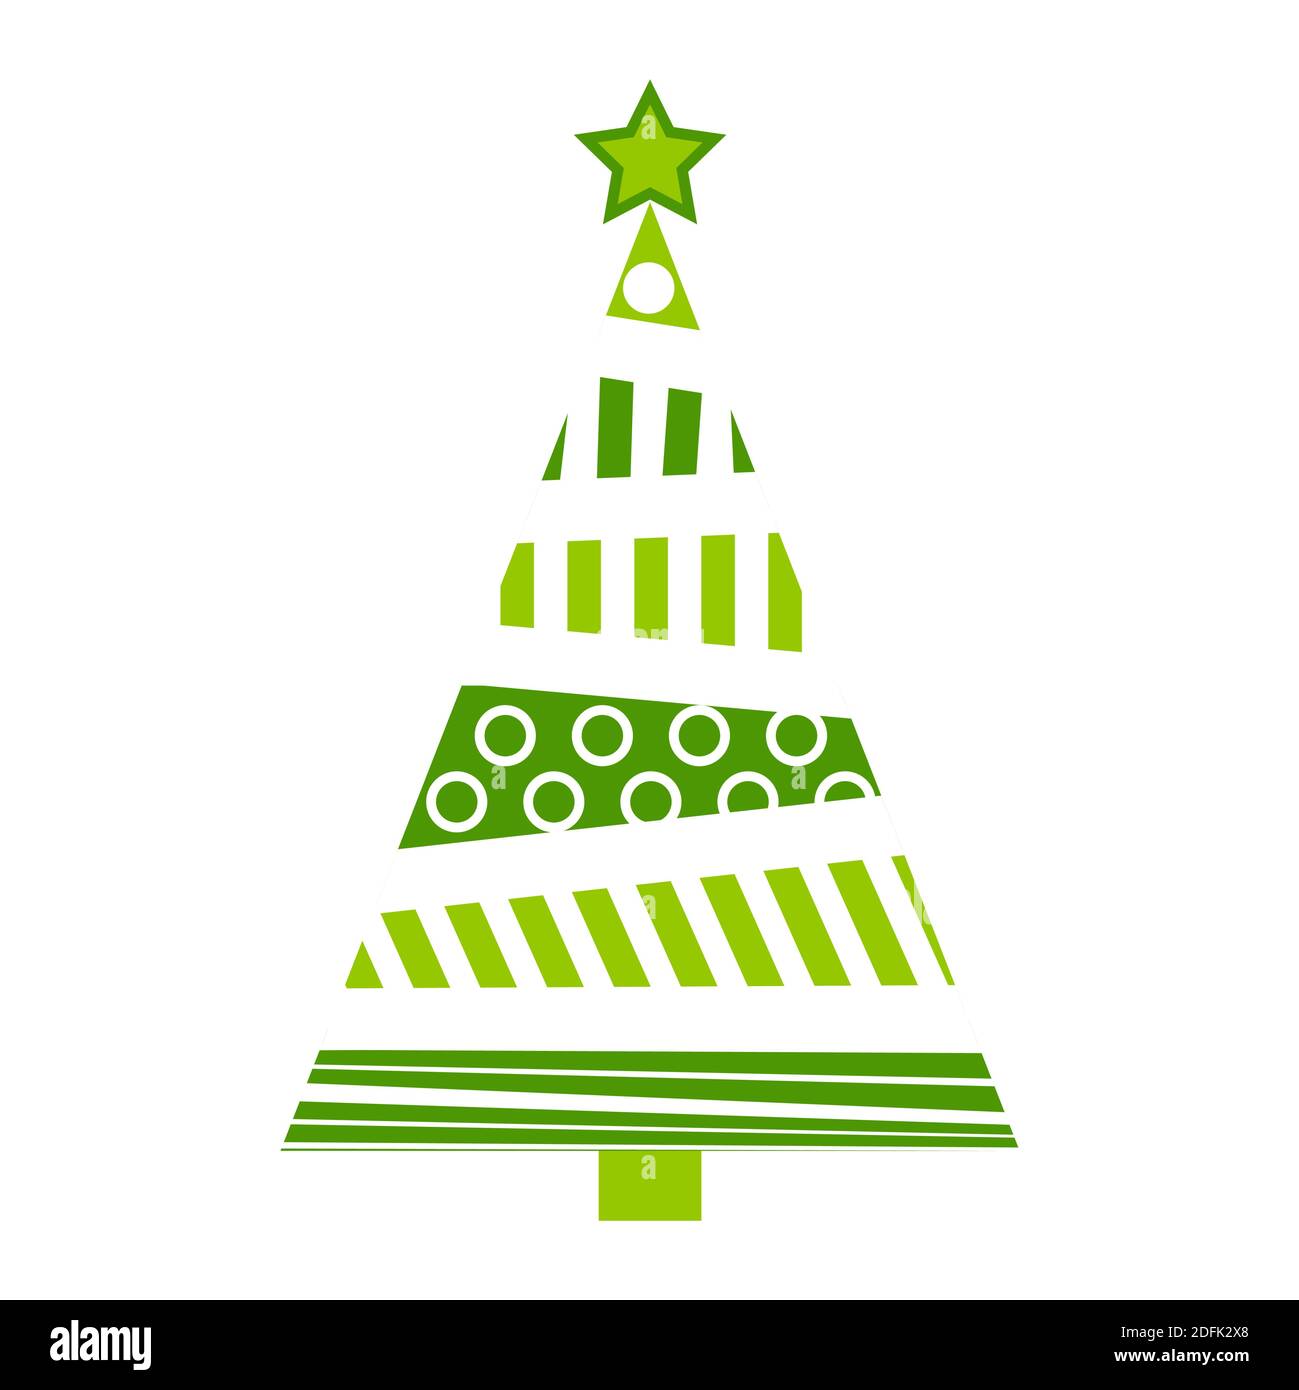 Christmas tree abstract illustration. Green fir tree for xmas made from bars and circles. Simple holiday symbol with geometrical shapes. Vector icon i Stock Vector